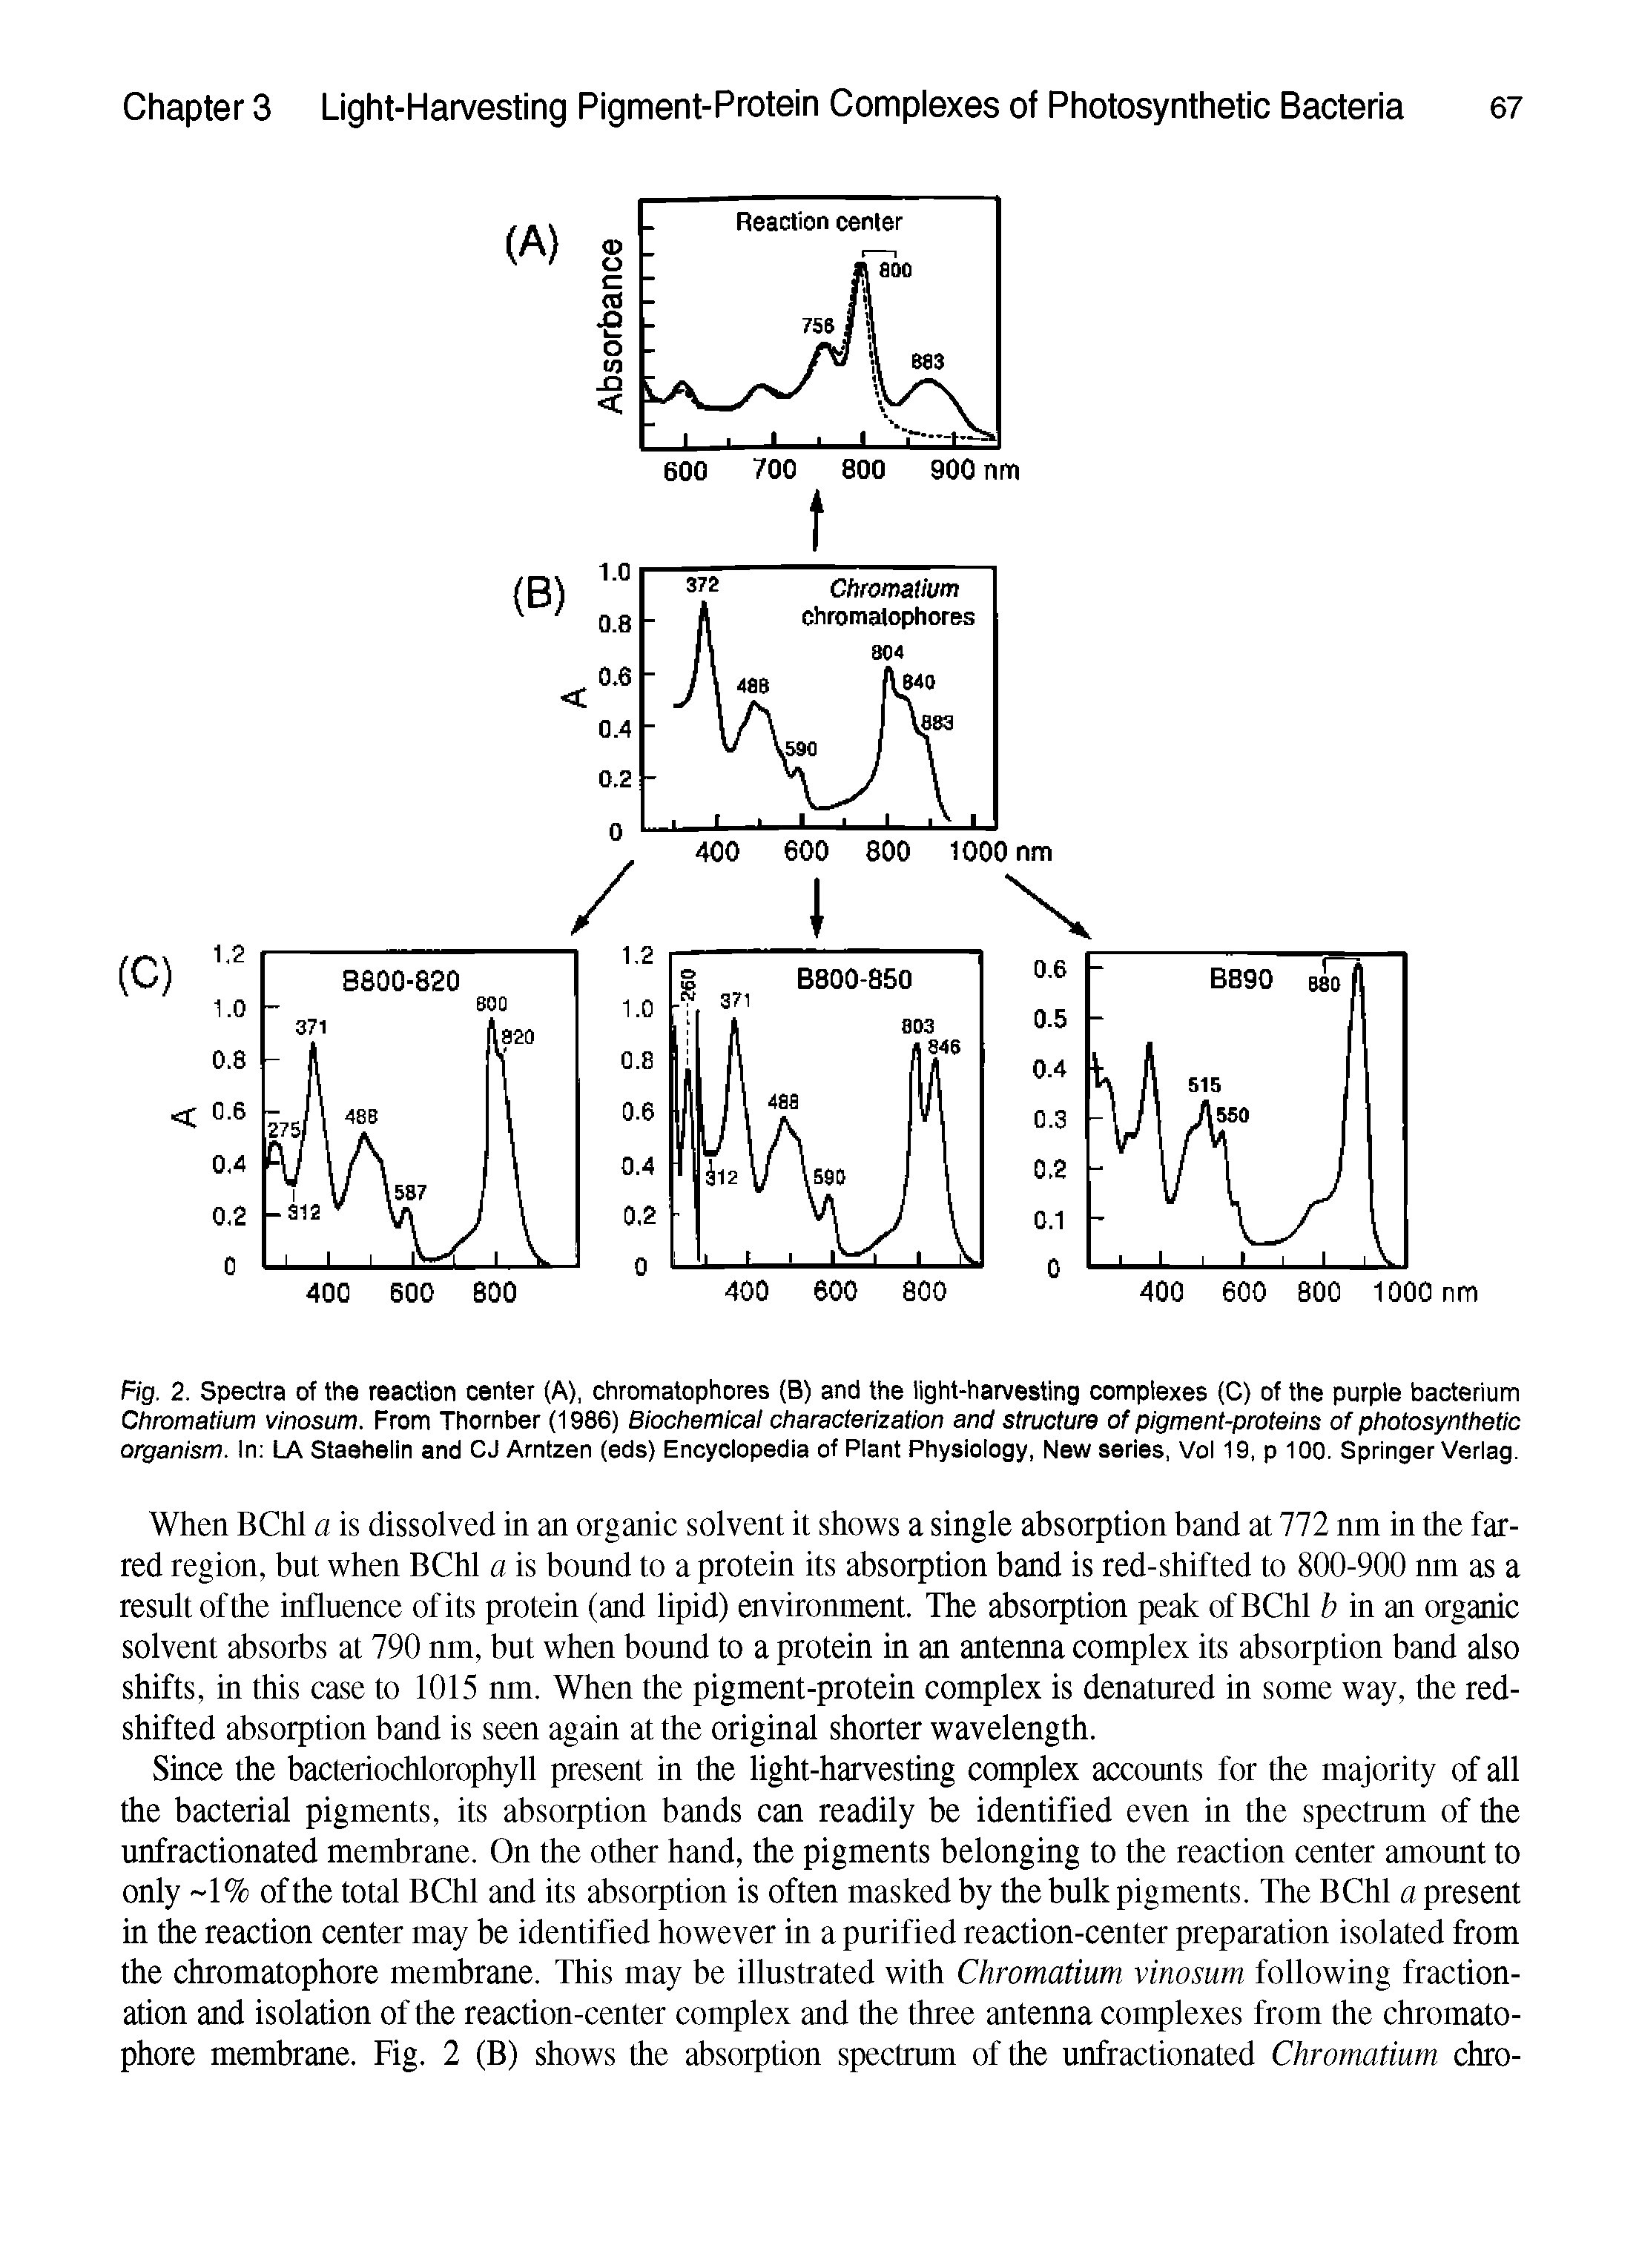 Fig. 2. Spectra of the reaction center (A), chromatophores (B) and the light-harvesting complexes (C) of the purple bacterium Chromatium vinosum. From Thornber (1986) Biochemical characterization and structure of pigment-proteins of photosynthetic organism. In LA Staehelin and CJ Arntzen (eds) Encyclopedia of Plant Physiology, New series, Vol 19, p 100. Springer Verlag.